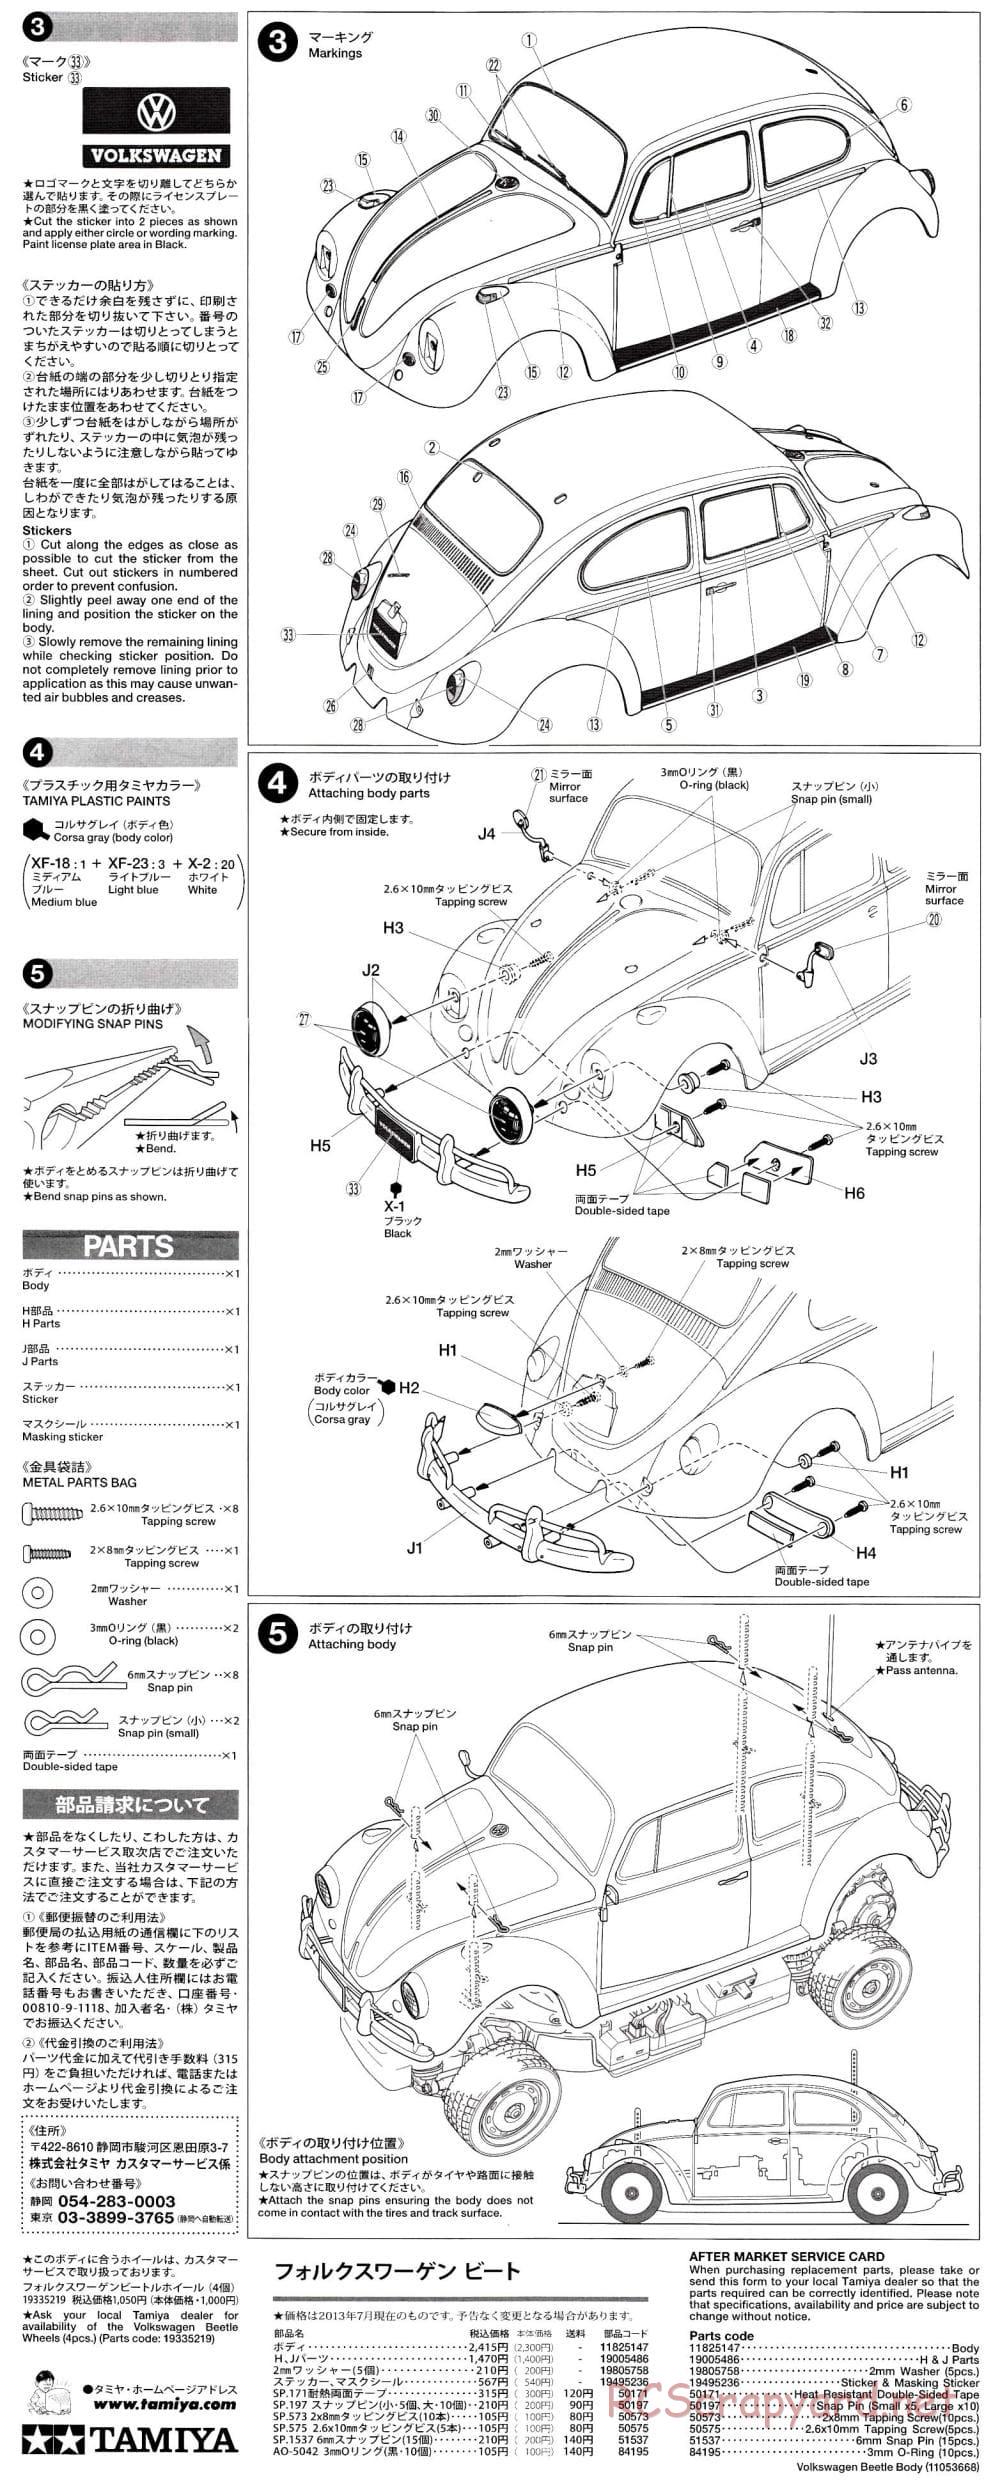 Tamiya - Volkswagen Beetle - M-06 Chassis - Body Manual - Page 2